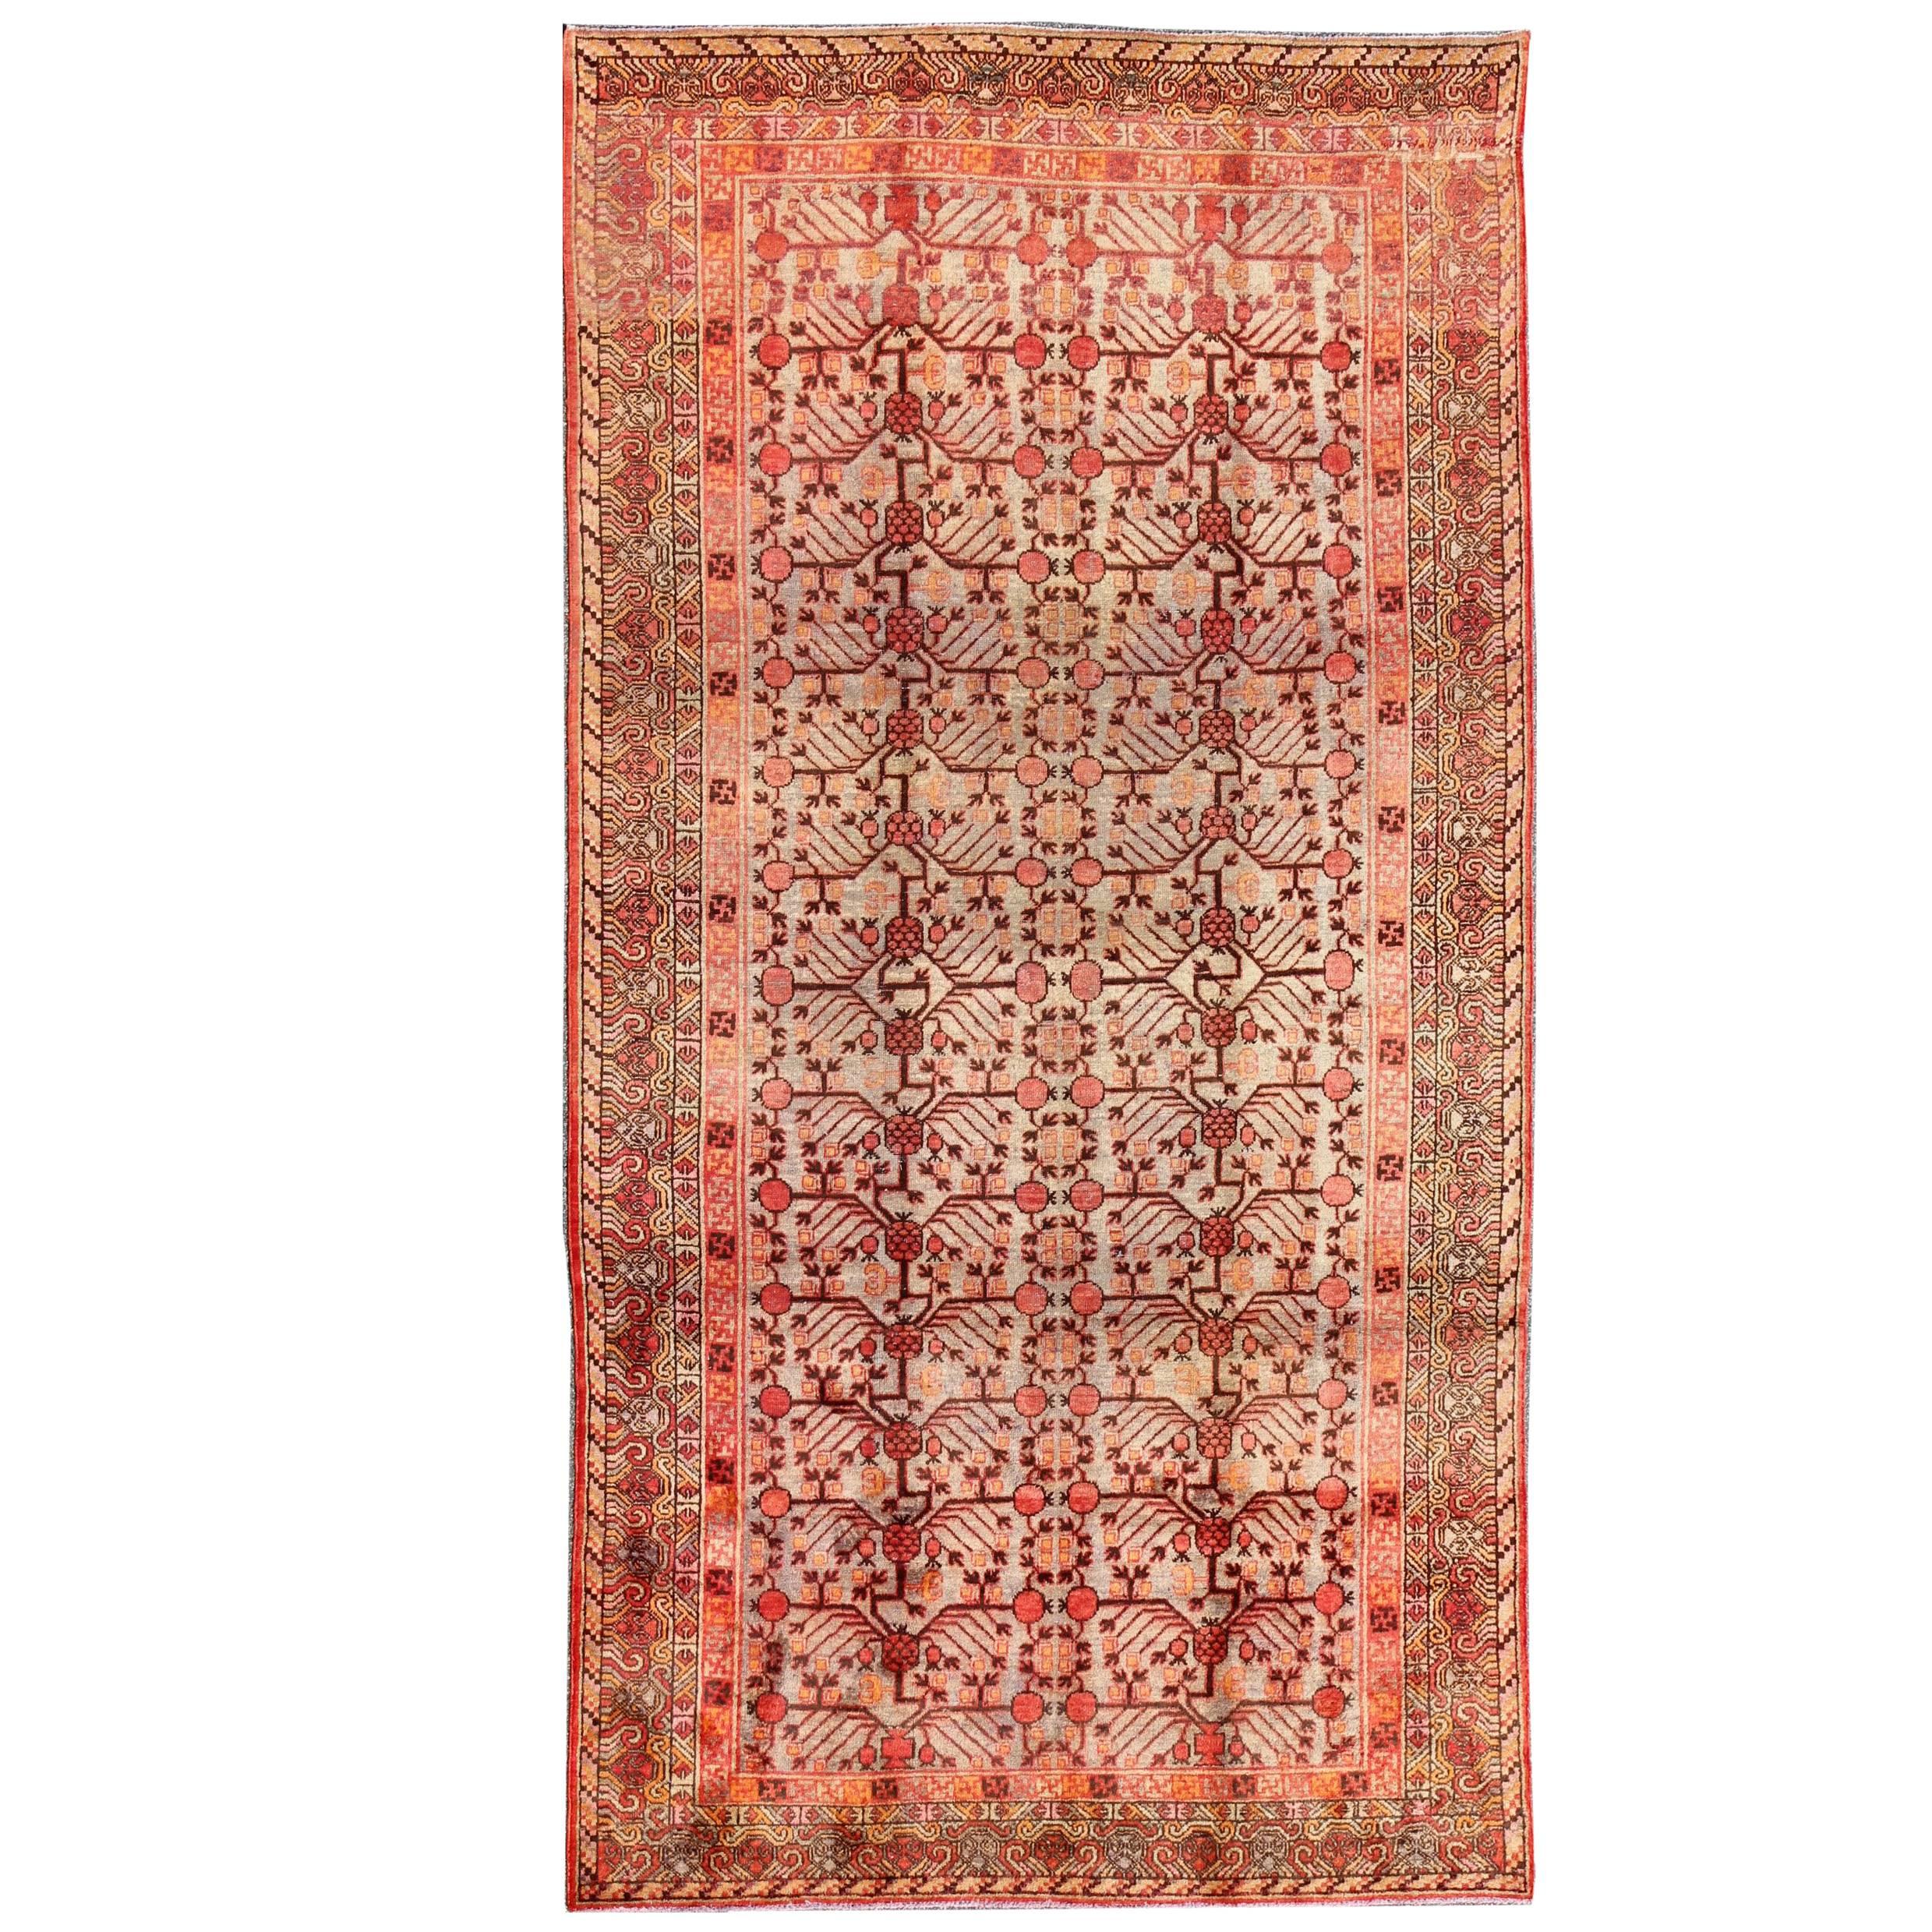 Large Khotan Antique Rug with Pomegranate Design in Taupe, Green, Red and Brown For Sale